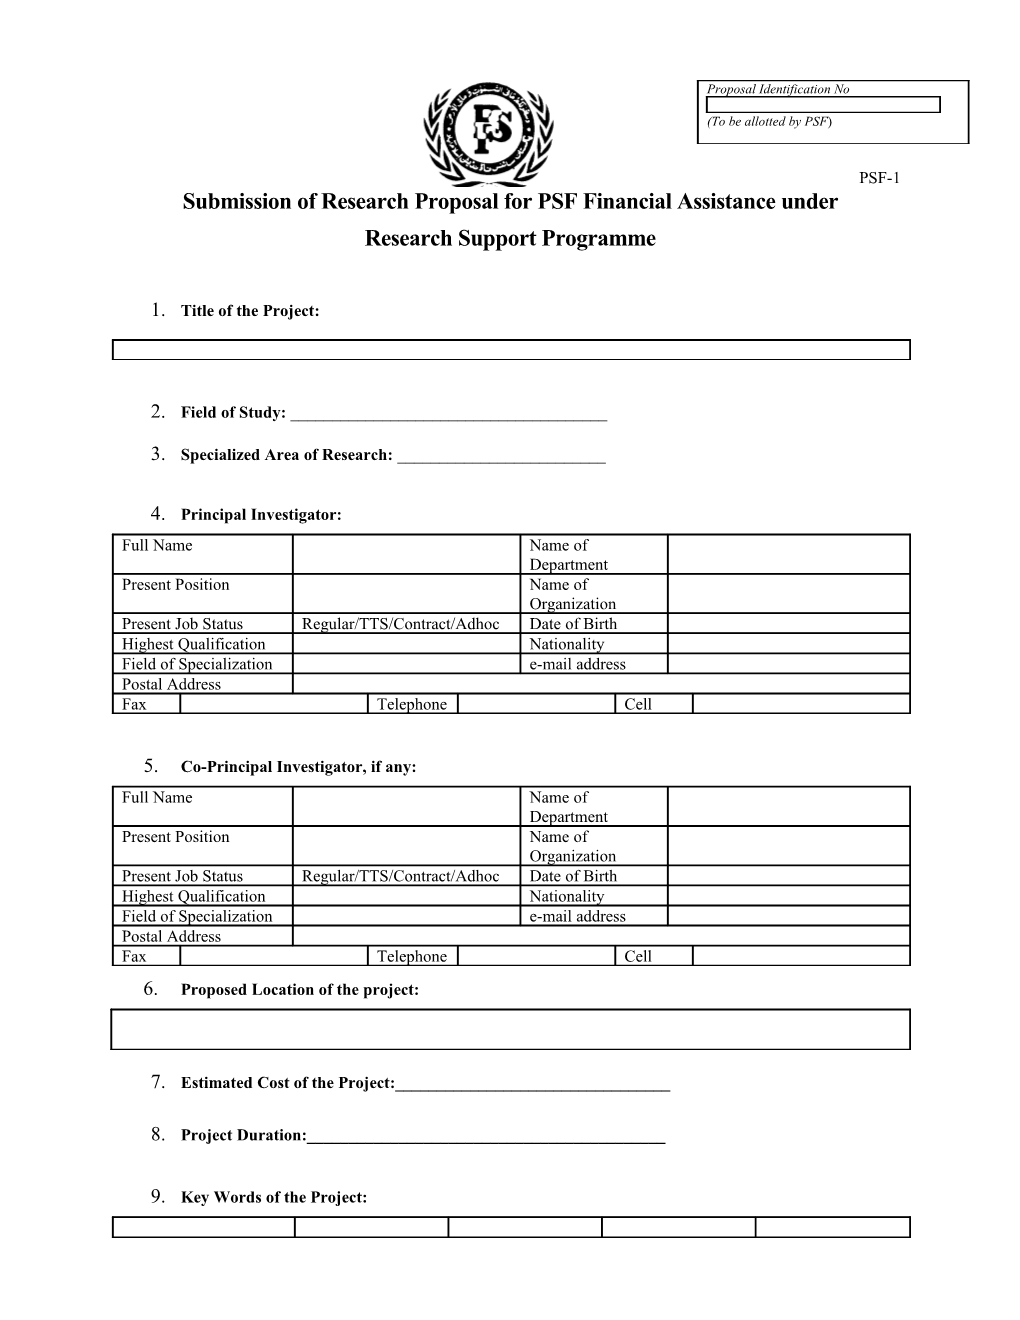 Submission of Research Proposal for PSF Financial Assistance Under